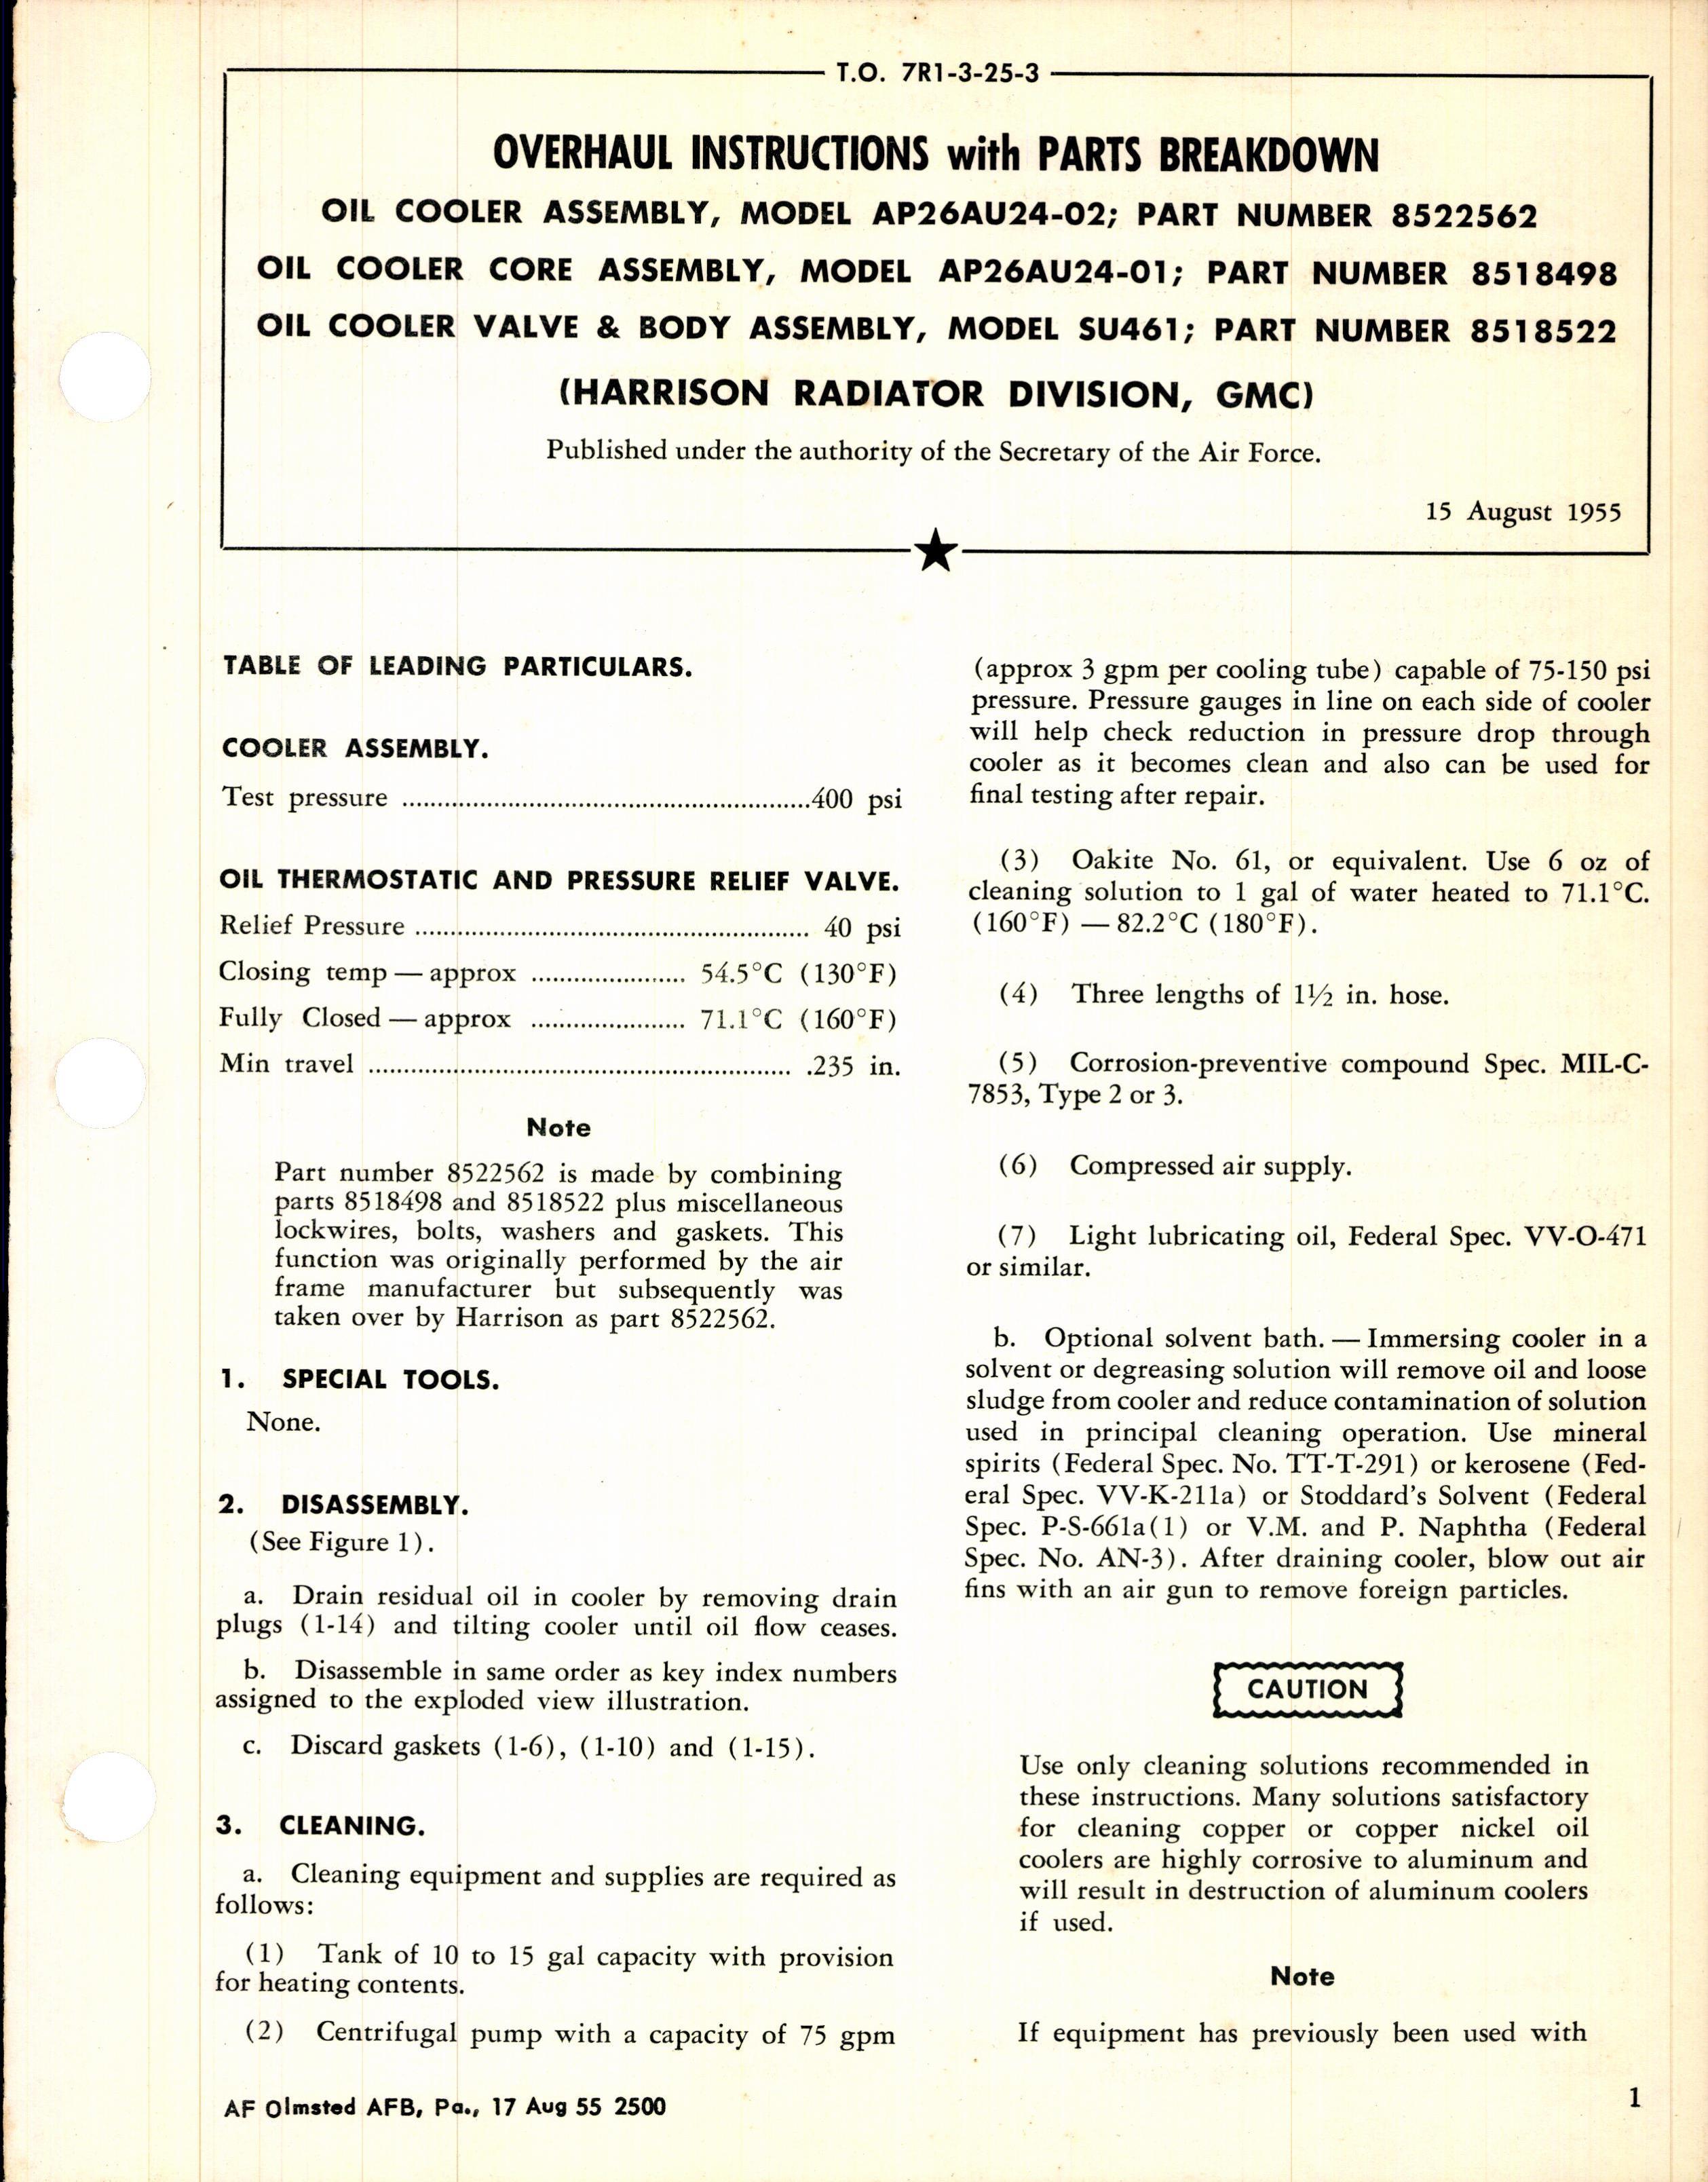 Sample page 1 from AirCorps Library document: Overhaul Instructions with Parts Breakdown for Oil Cooler Assembly Model AP26AU24-02 and AP26AU24-01